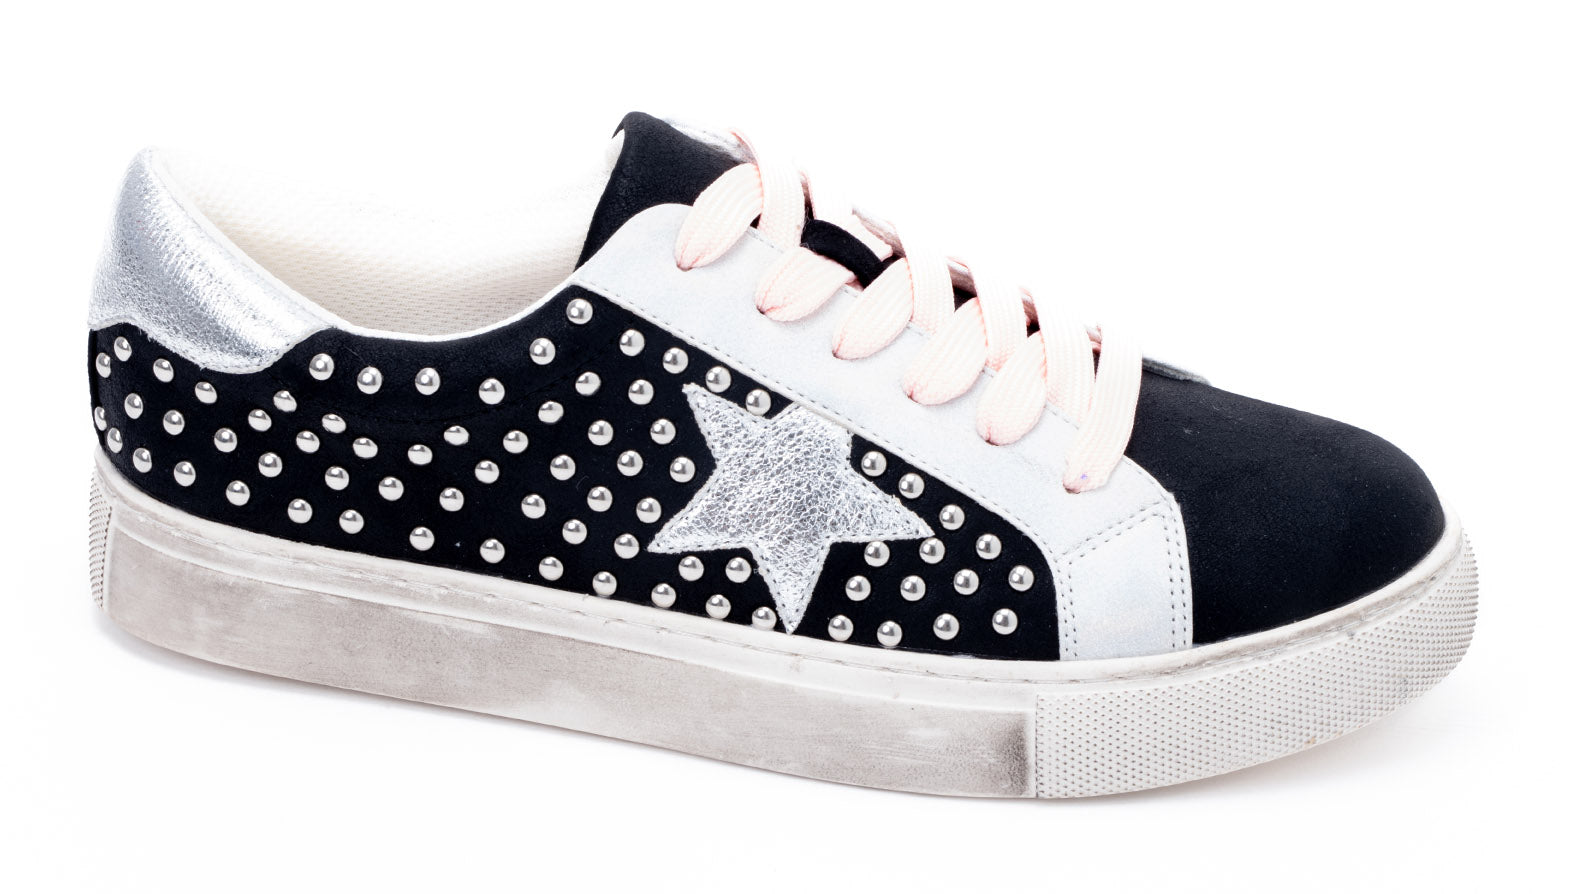 Market Live Preorder: Studded Supernova Sneaker by Corky’s (Ships in 2-3 Weeks)